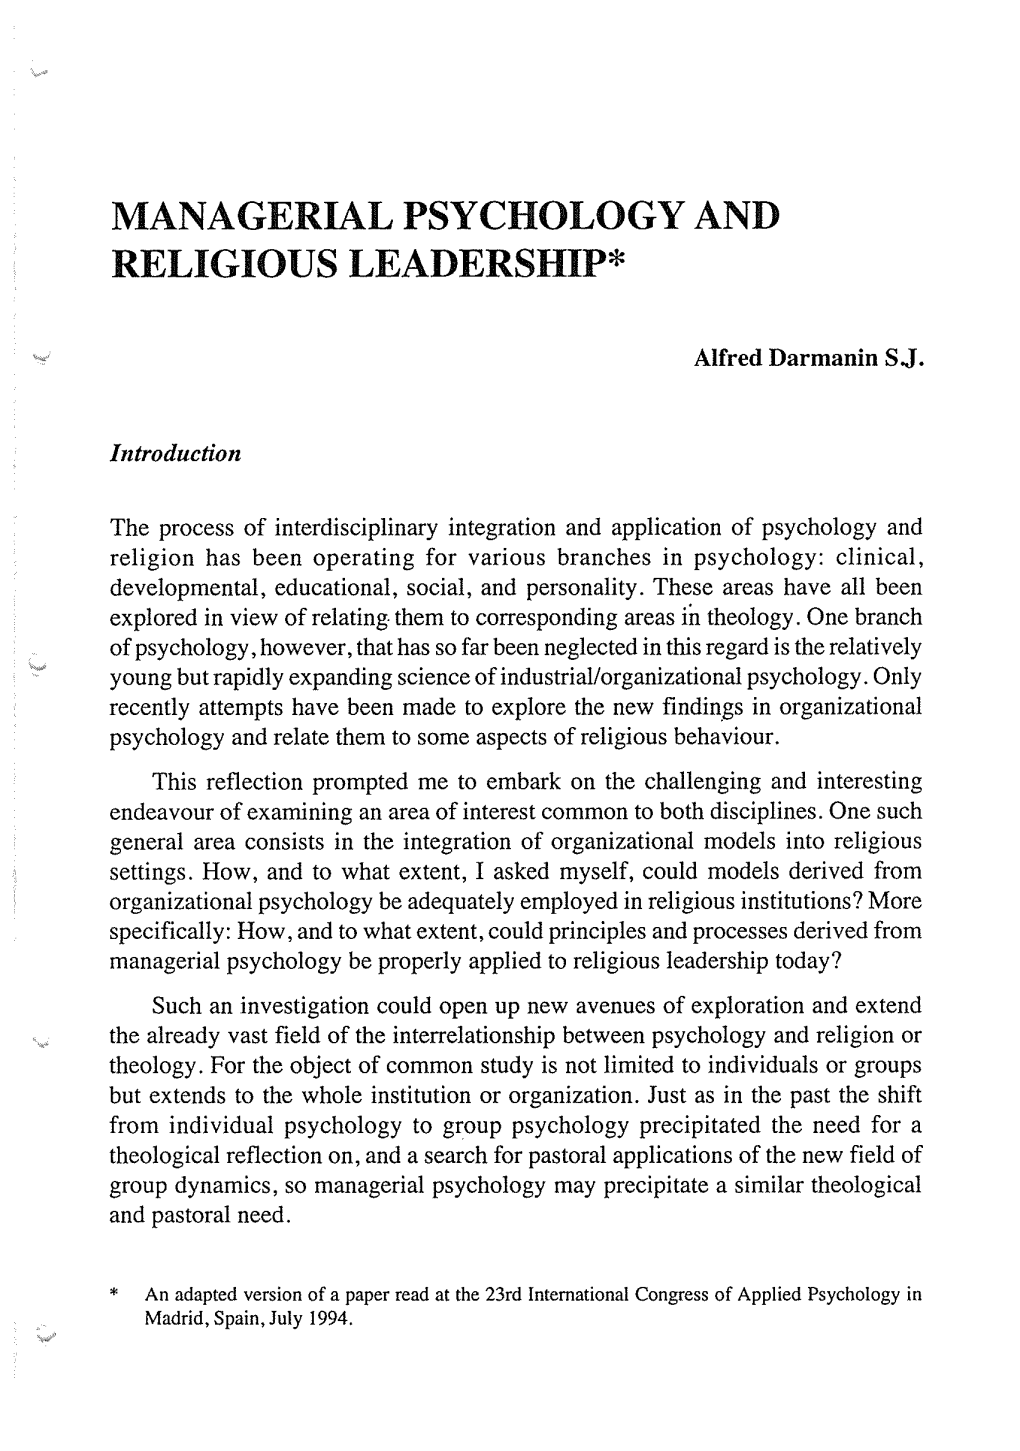 Managerial Psychology and Religious Leadership*